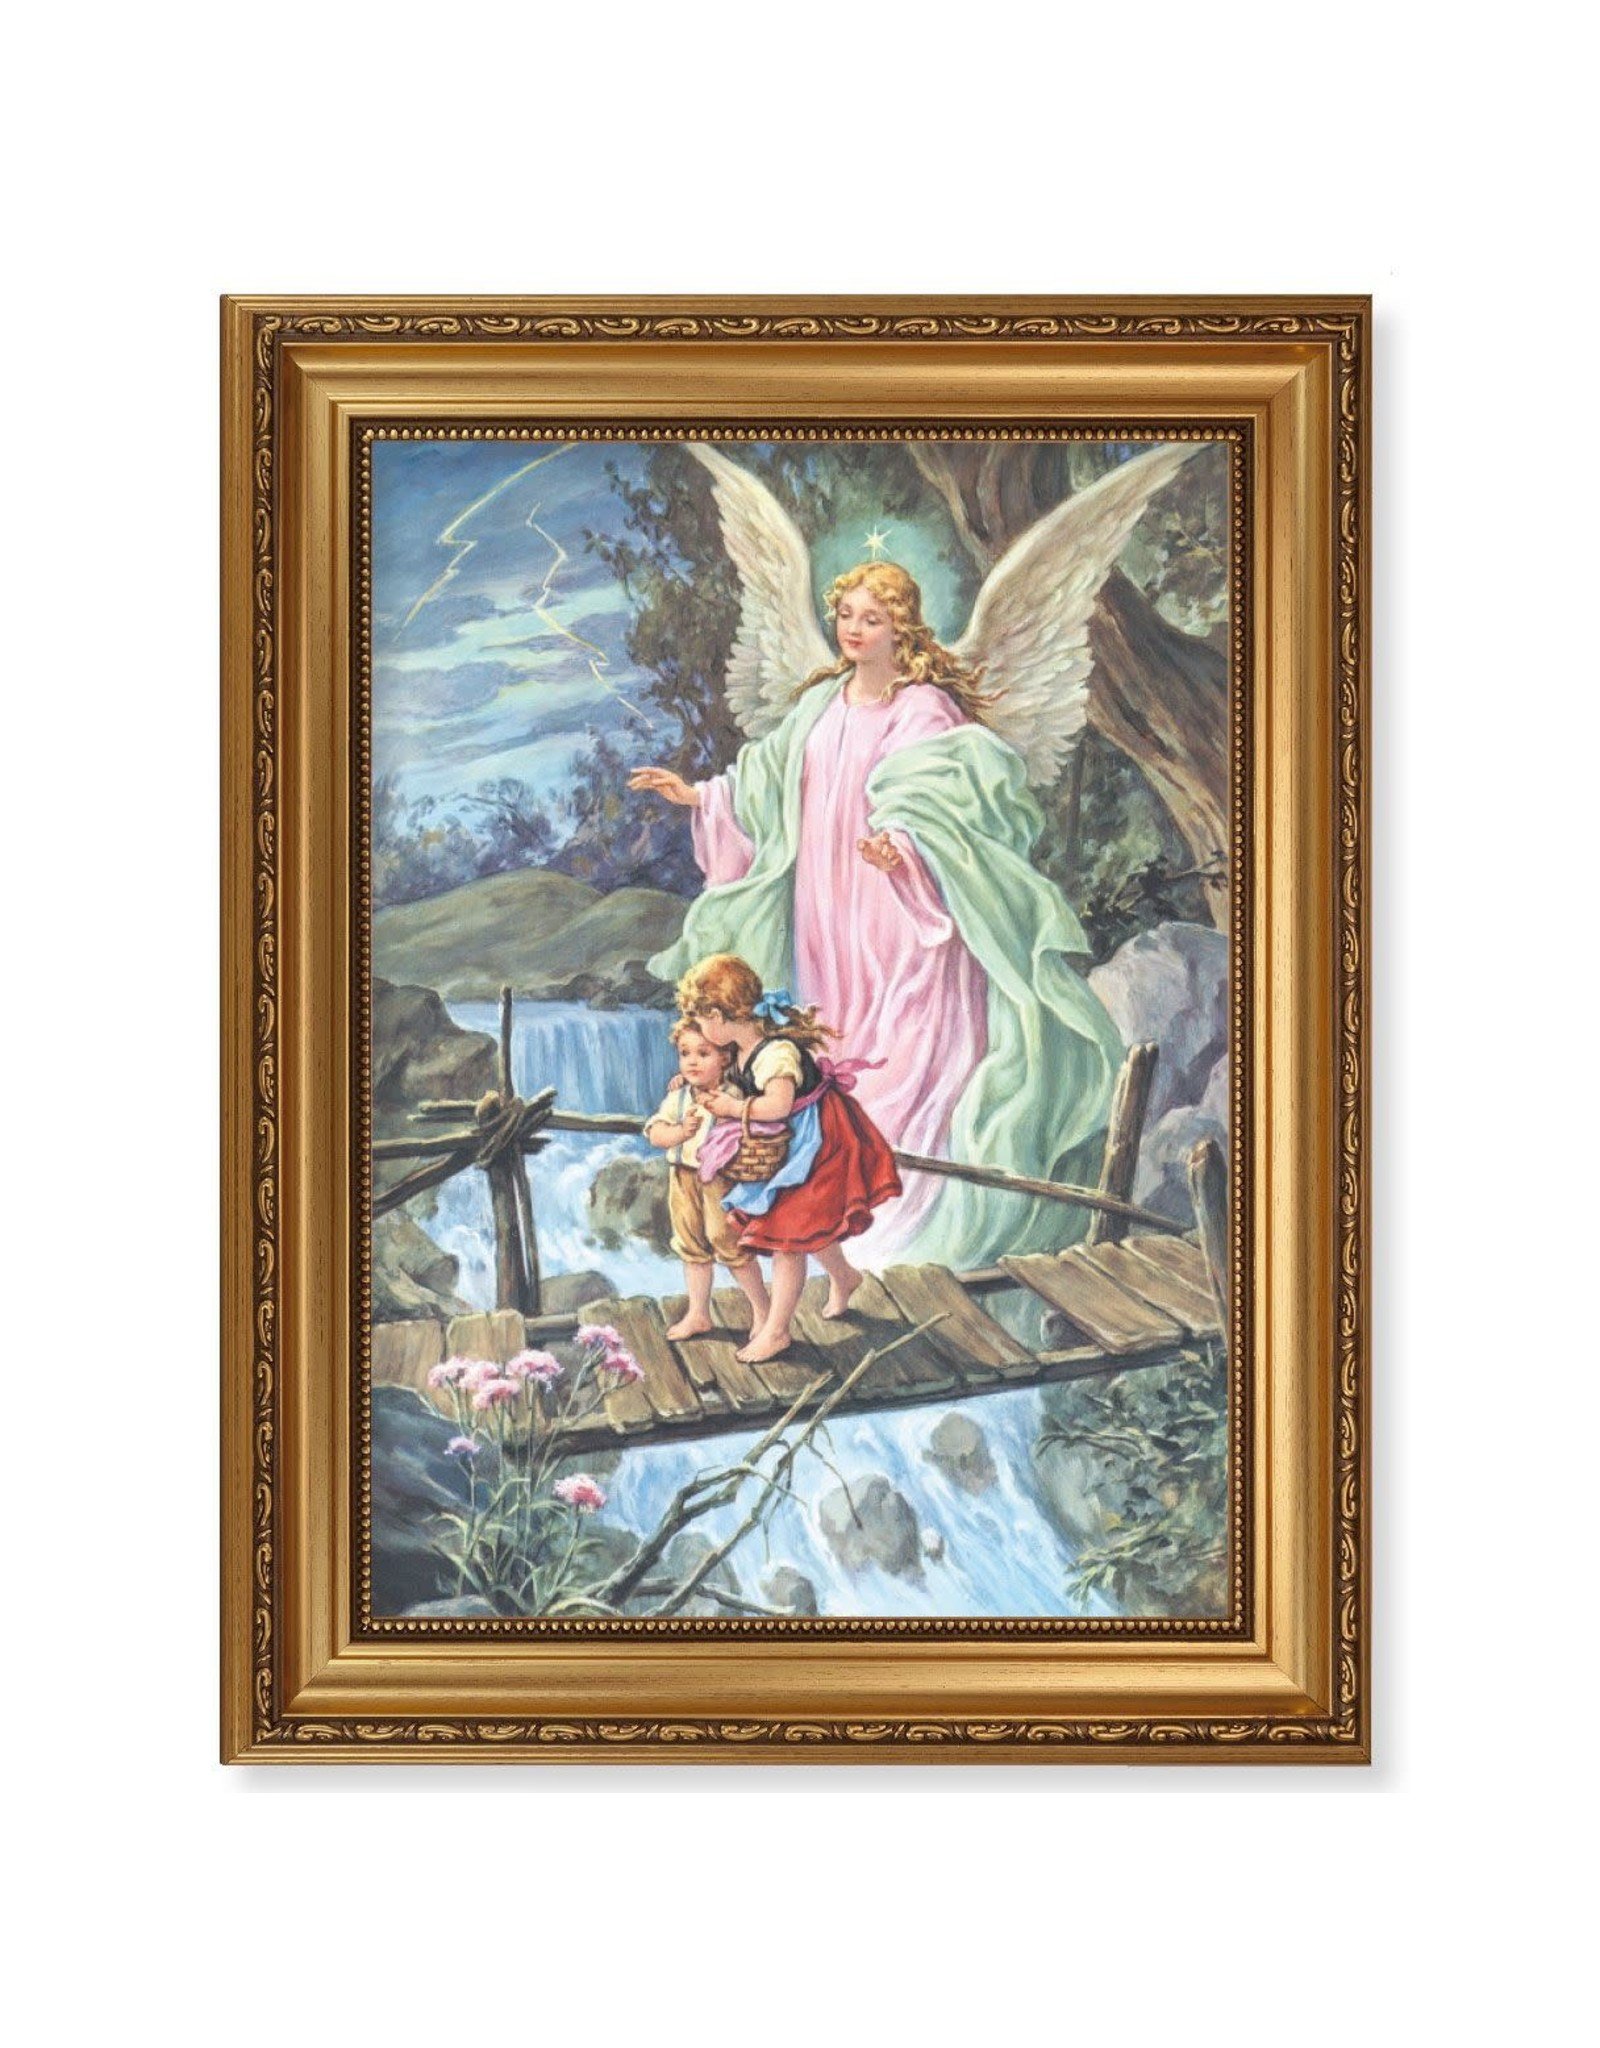 Hirten Picture - Guardian Angel - 15.5x19.5 Antique Gold Leaf Beveled Frame with Bead Inlay